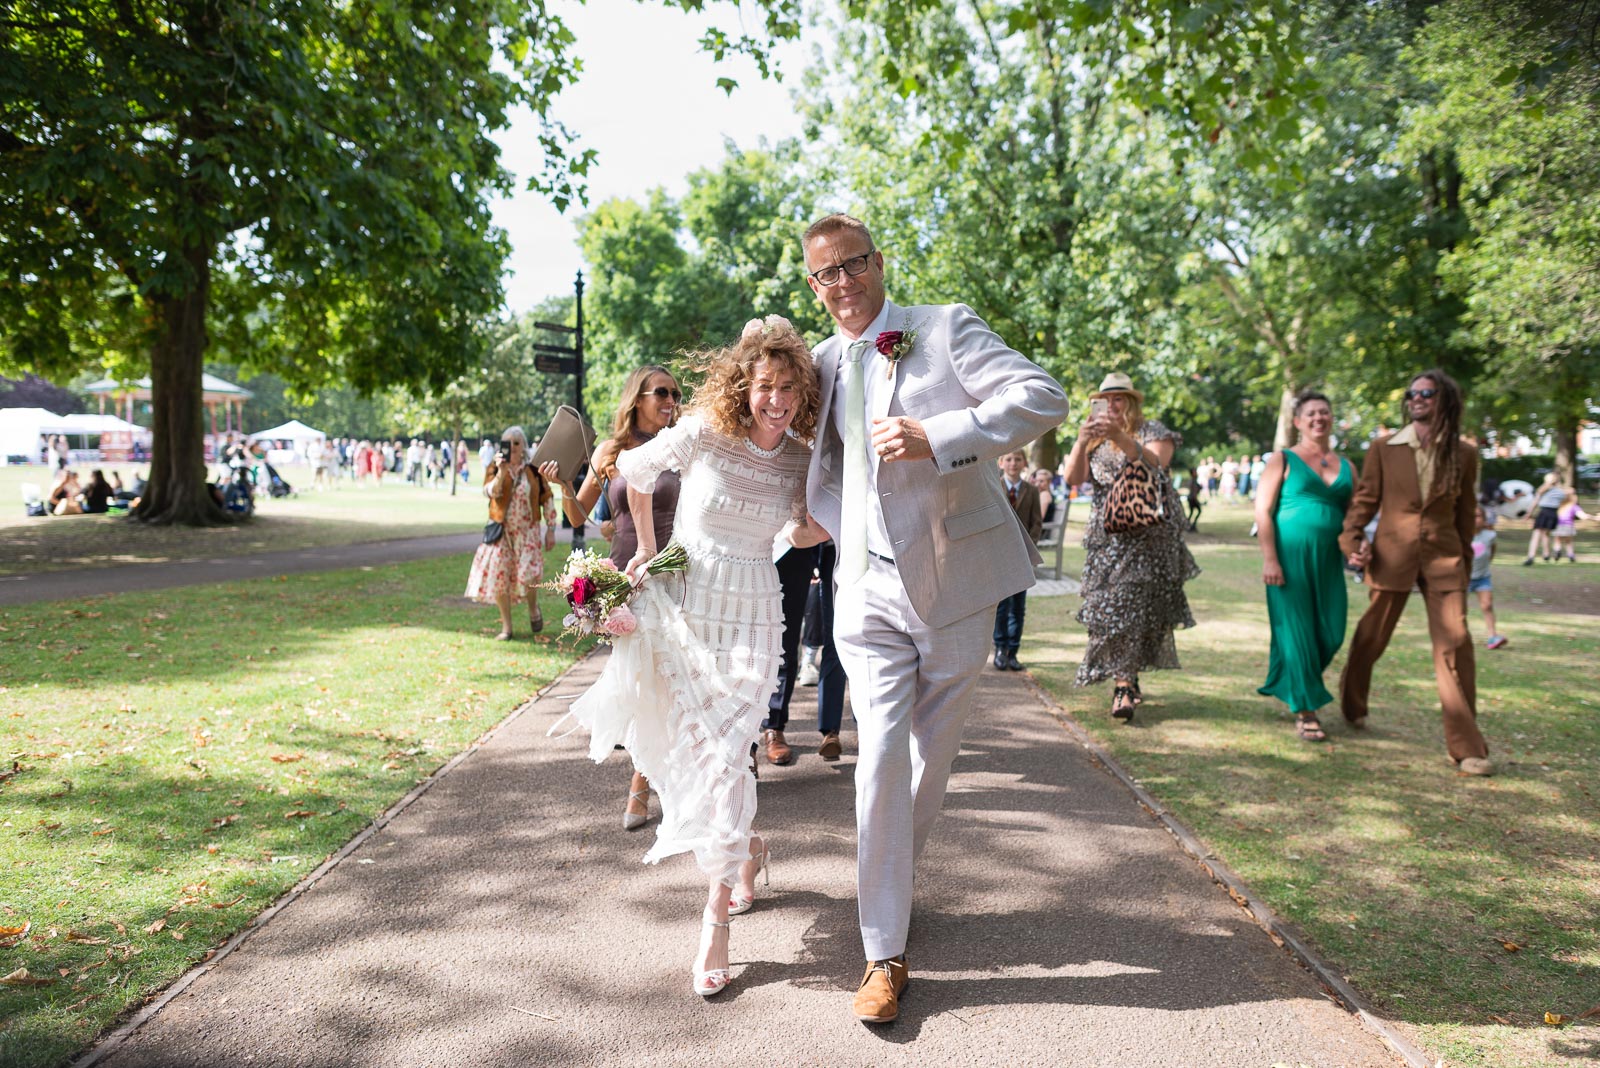 Wedding Photographer for Kitty and Will at Queens Park in London